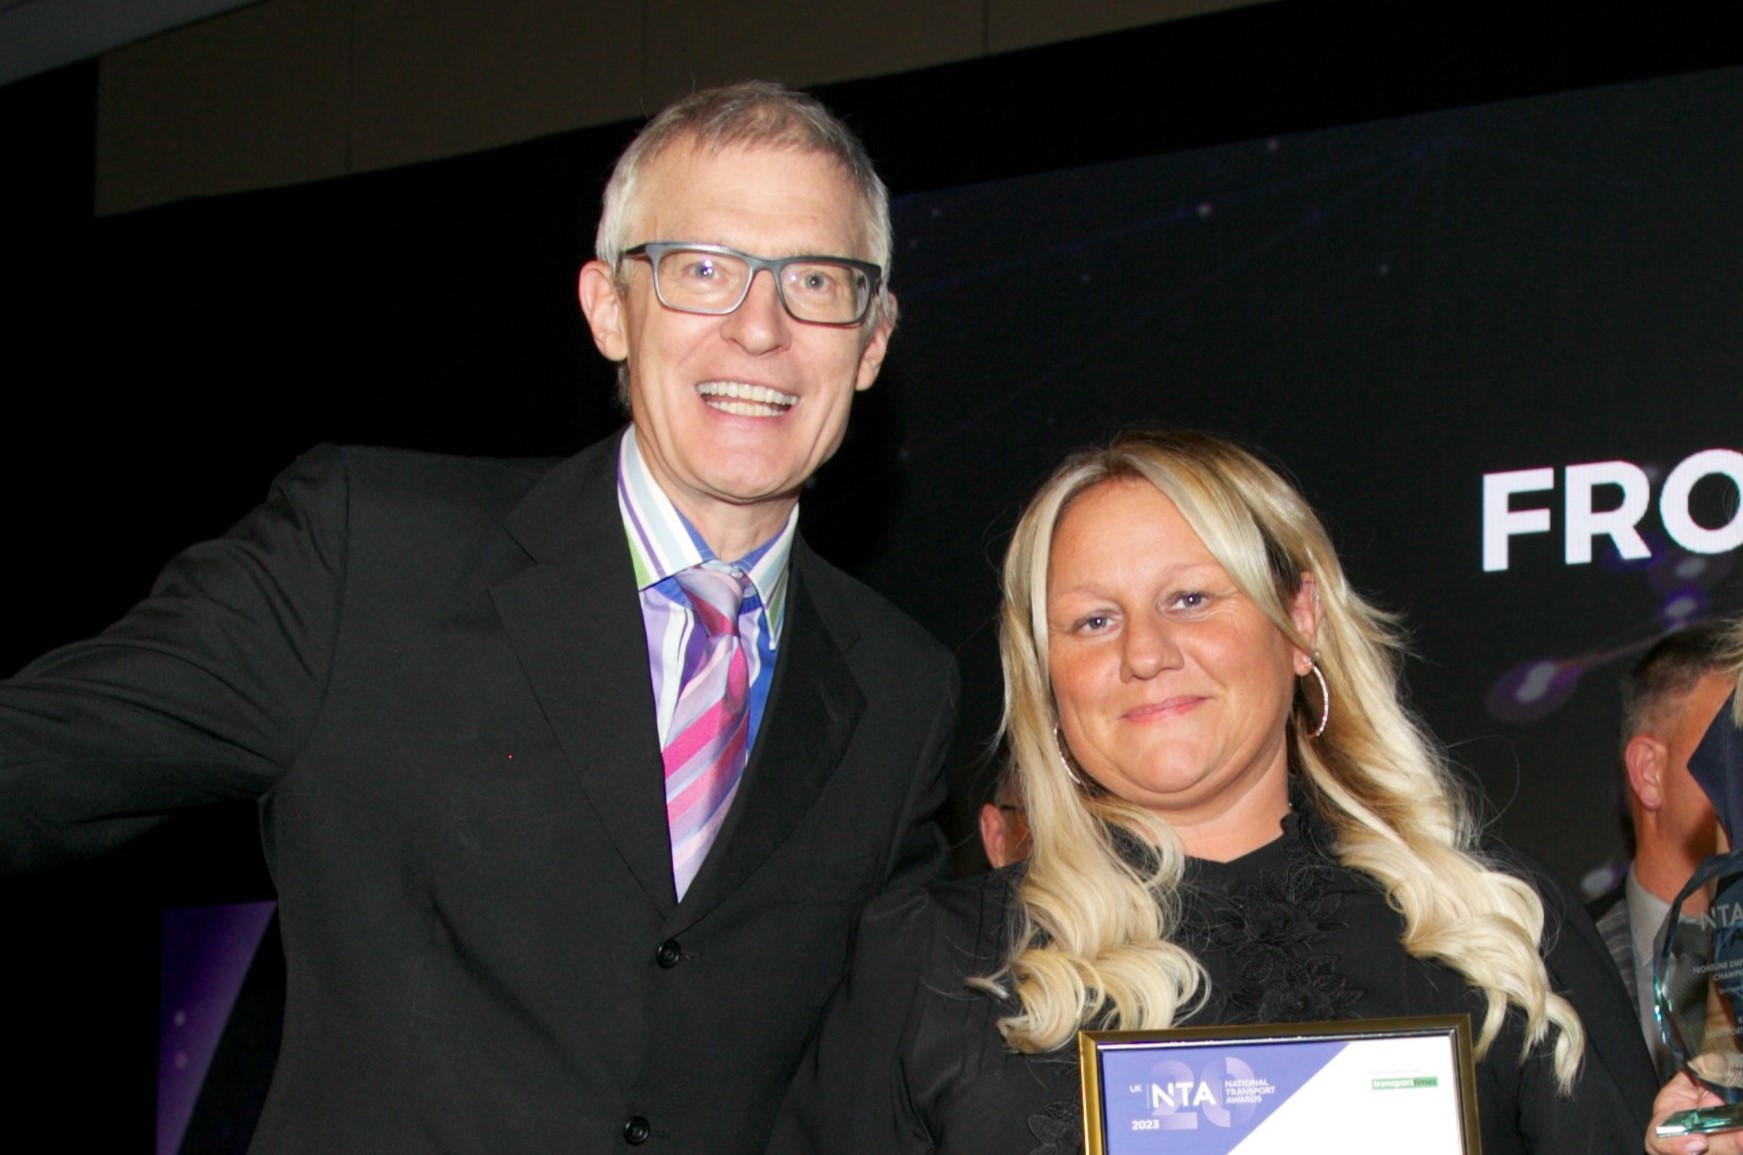 Broadcaster Jeremy Vine presents Kate Evans with her frontline employee of the year award on stage